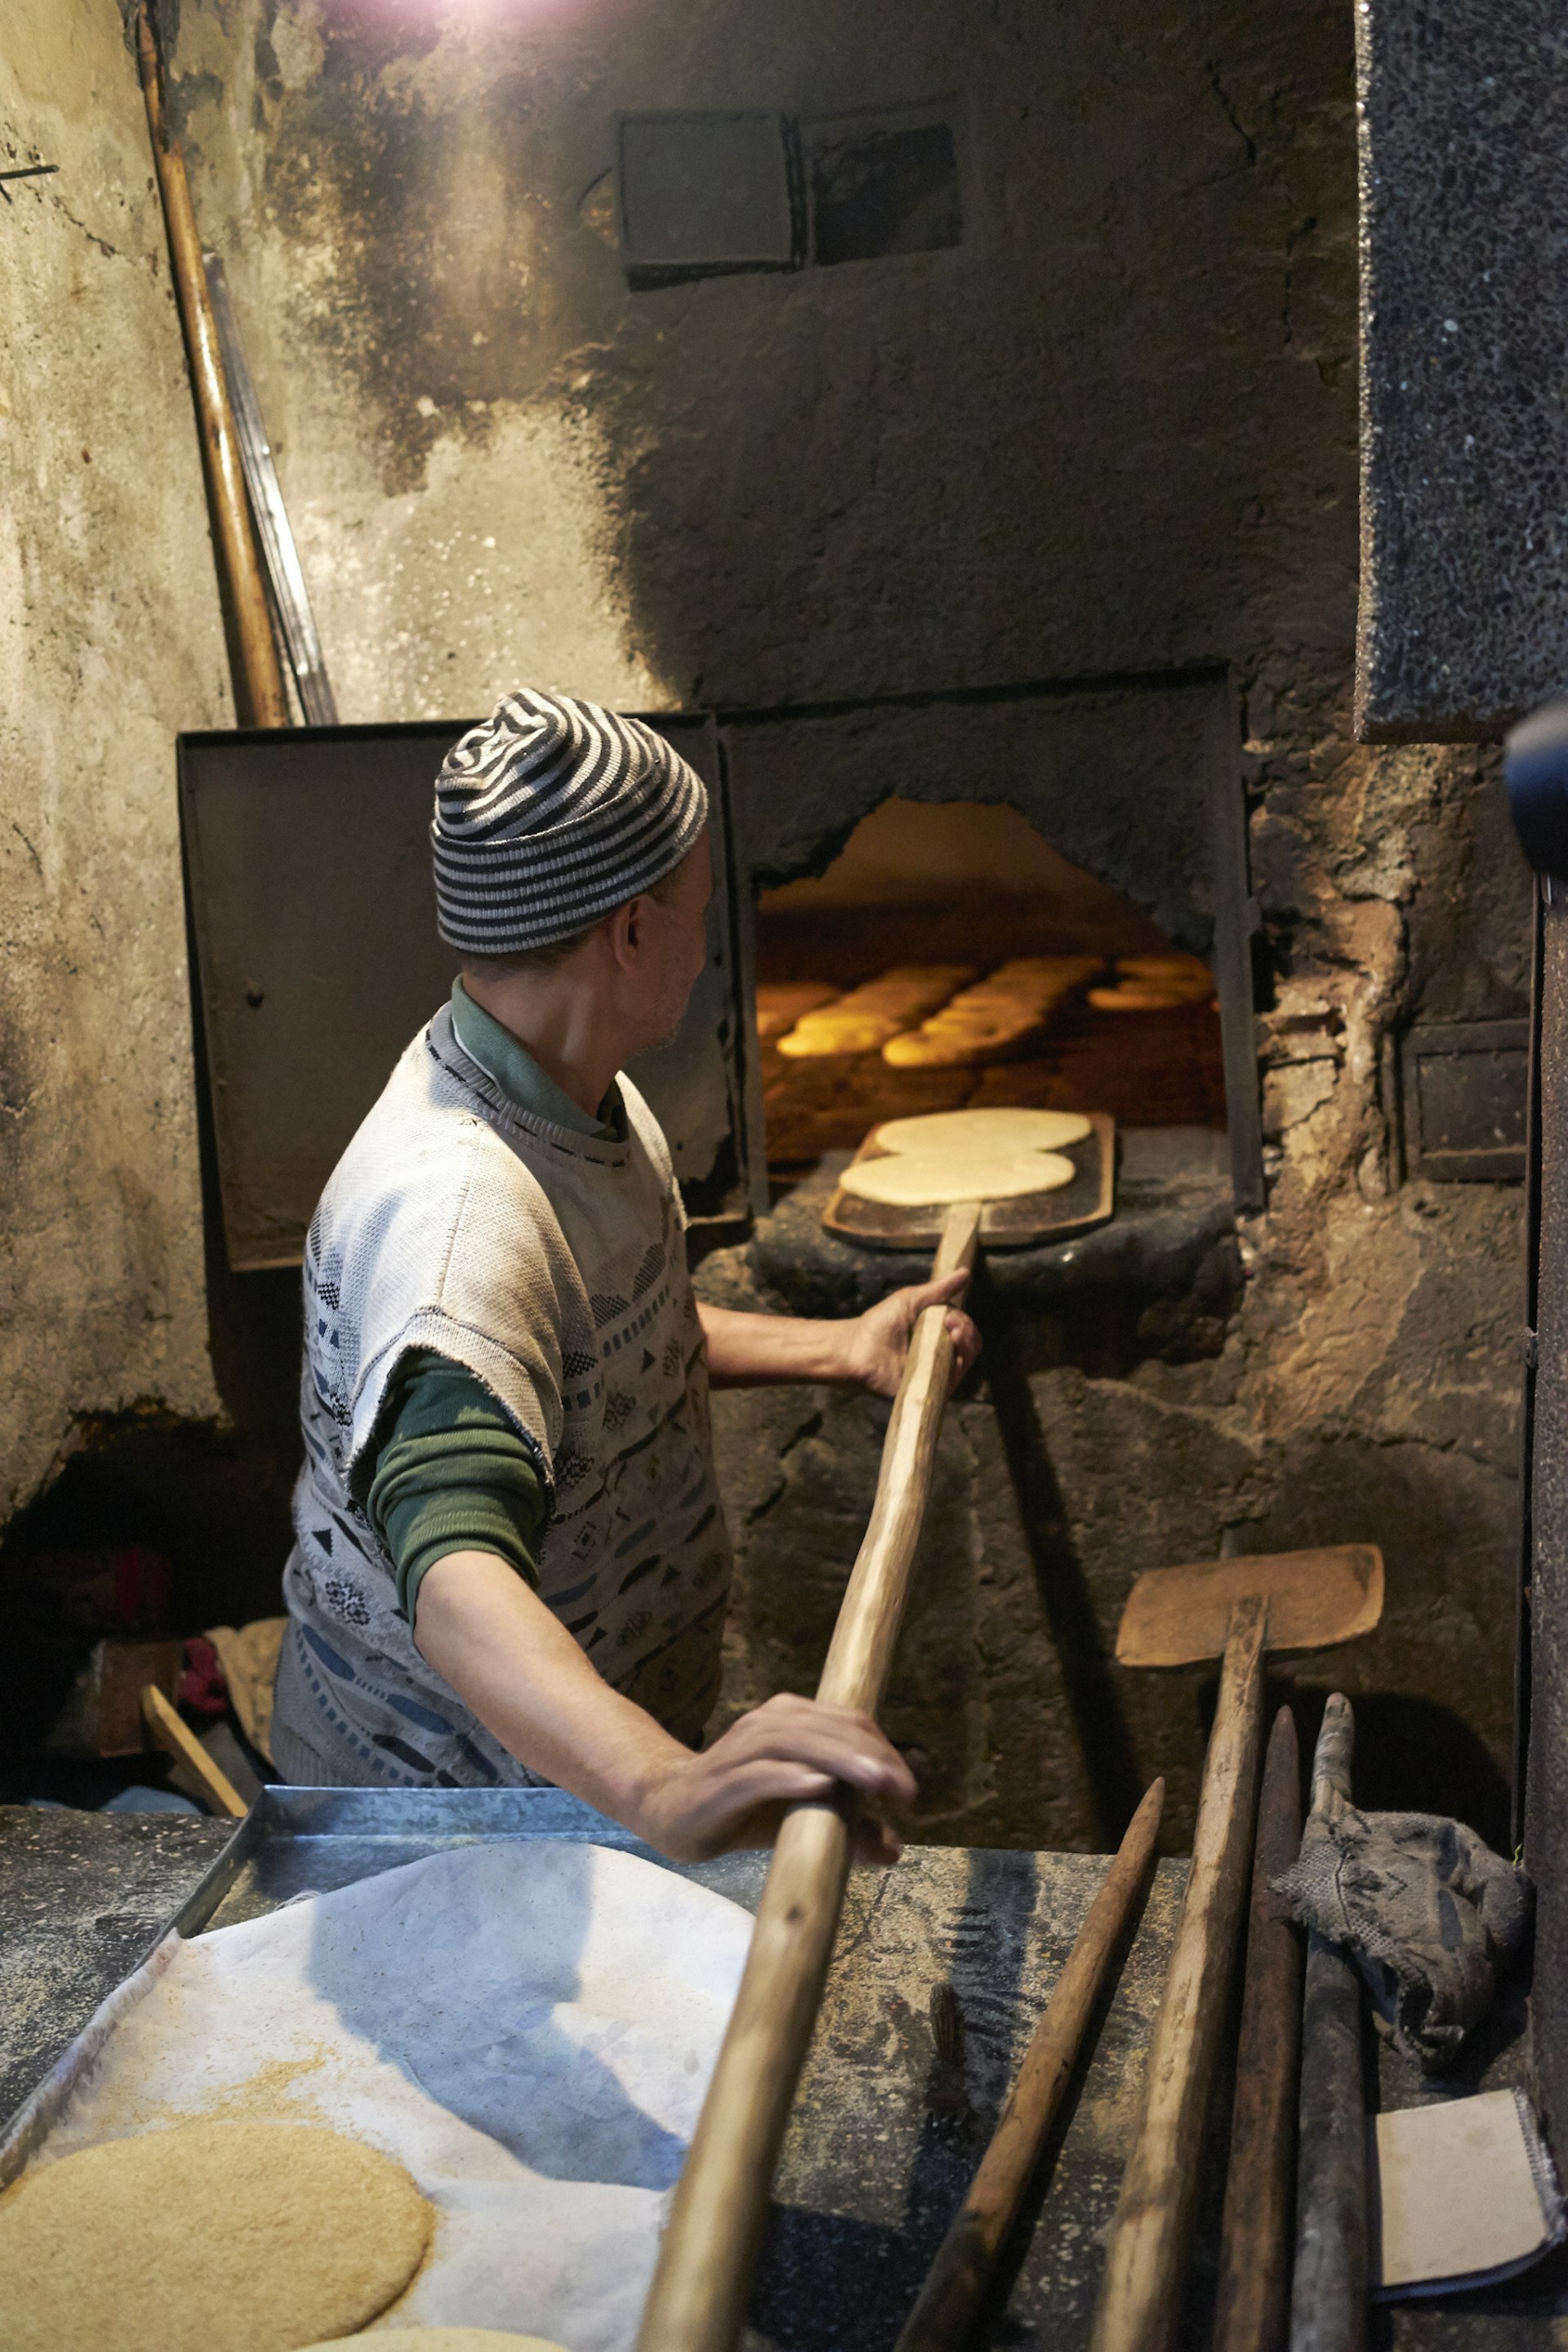 A man putting some bread into a traditional street oven in Fez, Morocco